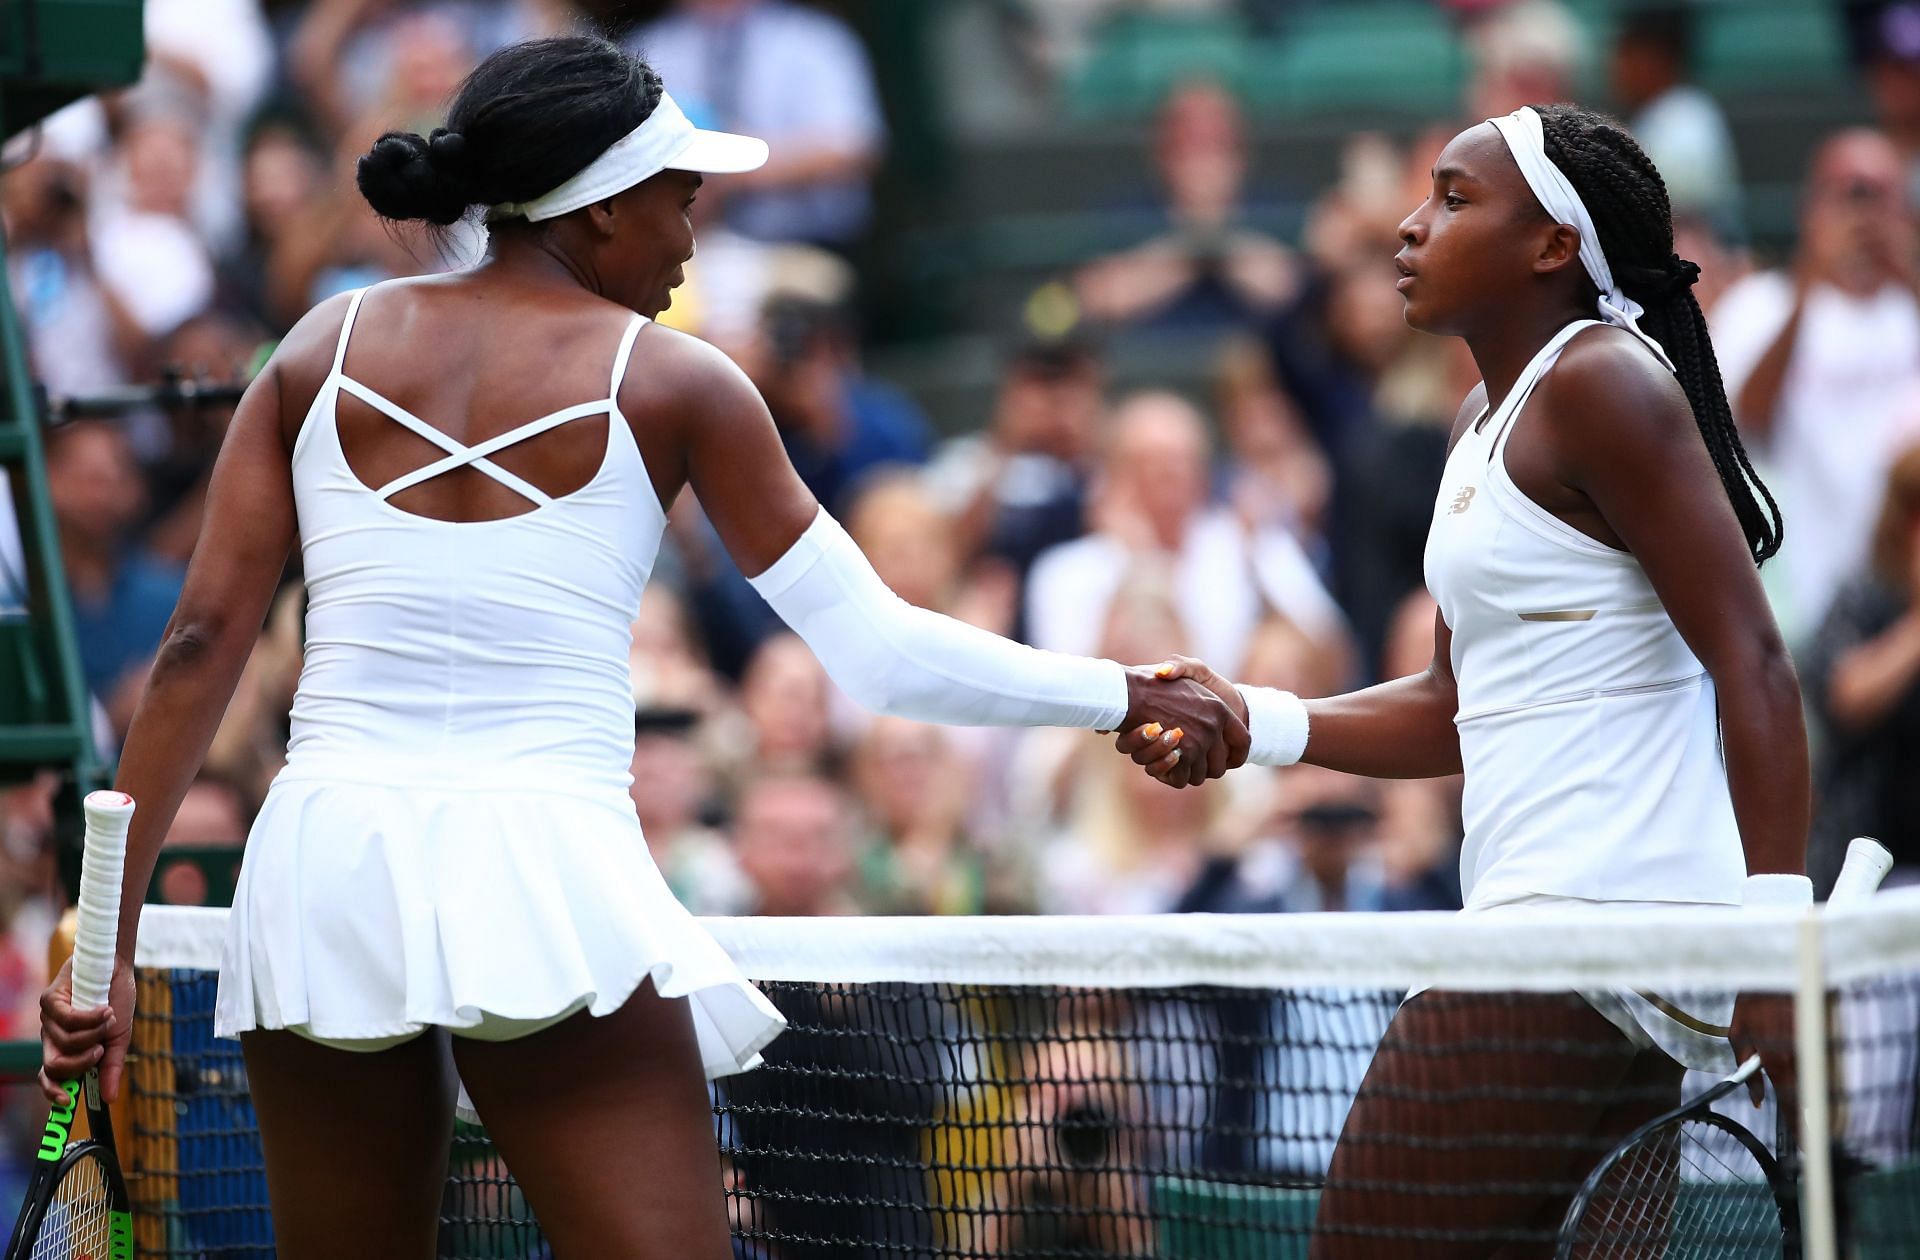 Coco Gauff shot to fame after beating Venus Williams at the 2019 Wimbledon Championships